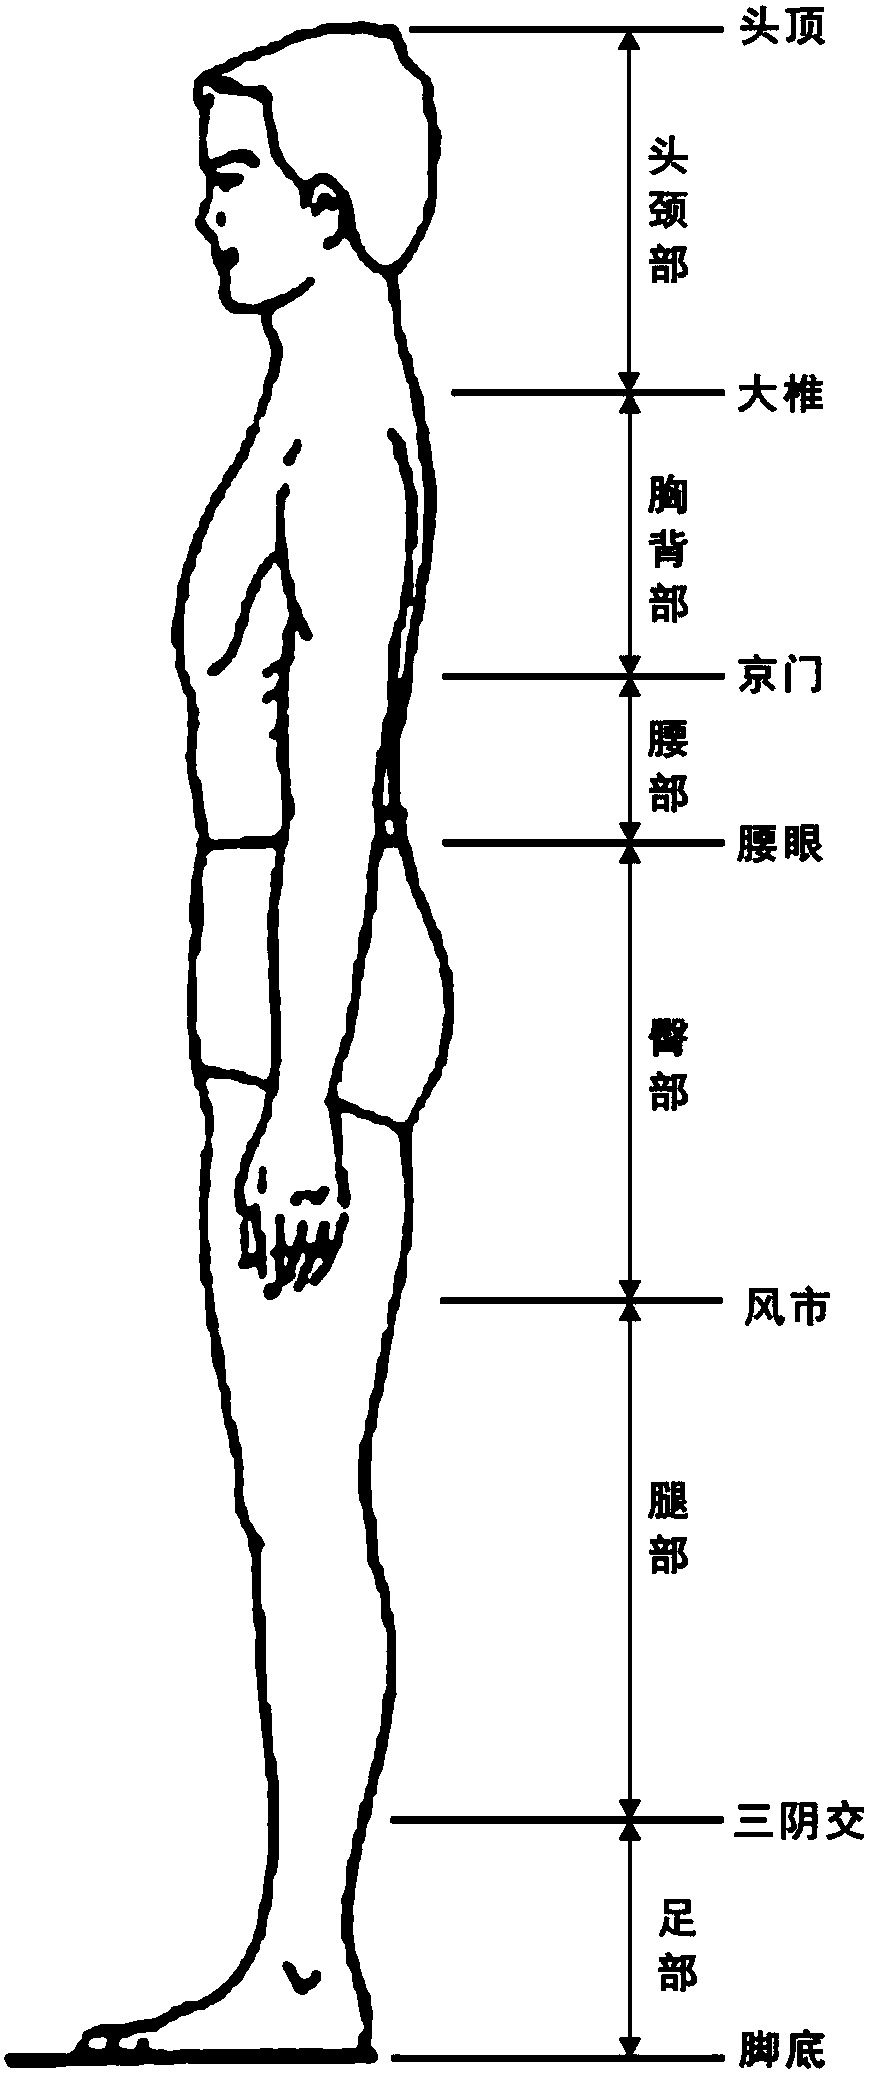 Customized mattress and producing method thereof